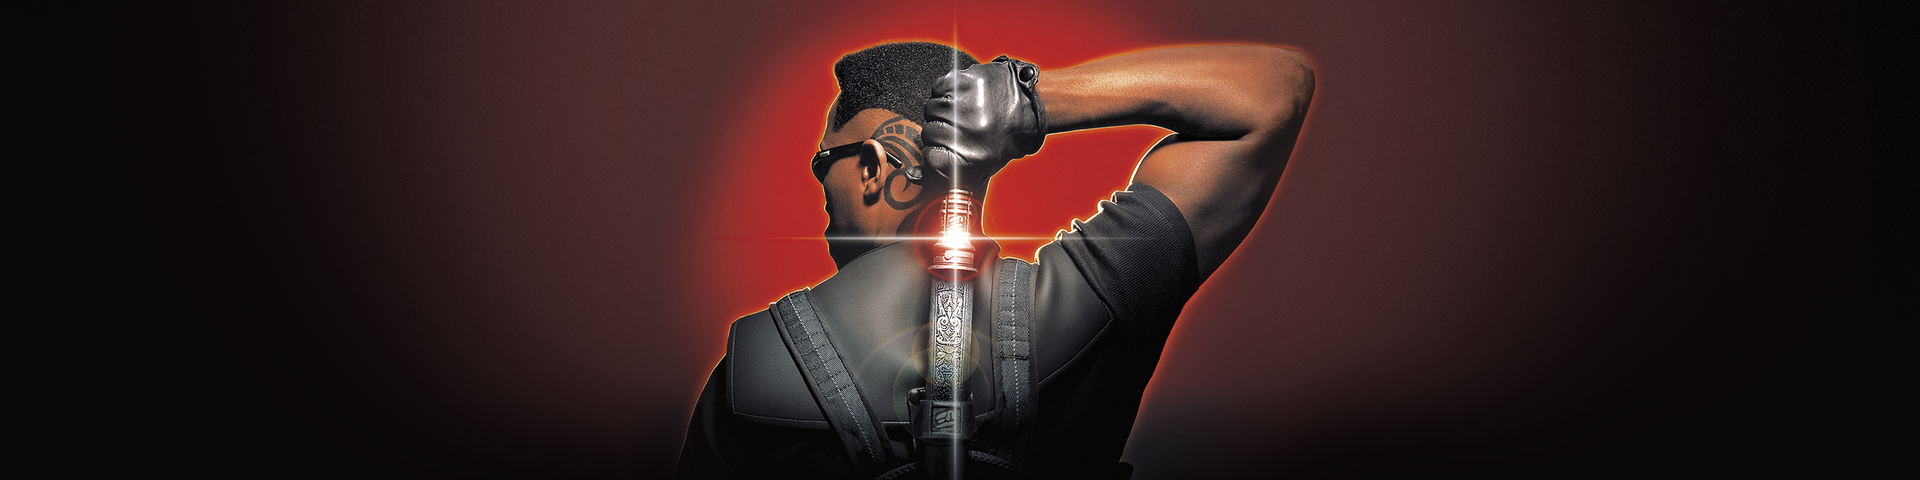 chuck mcmillion recommends blade full movie hd pic